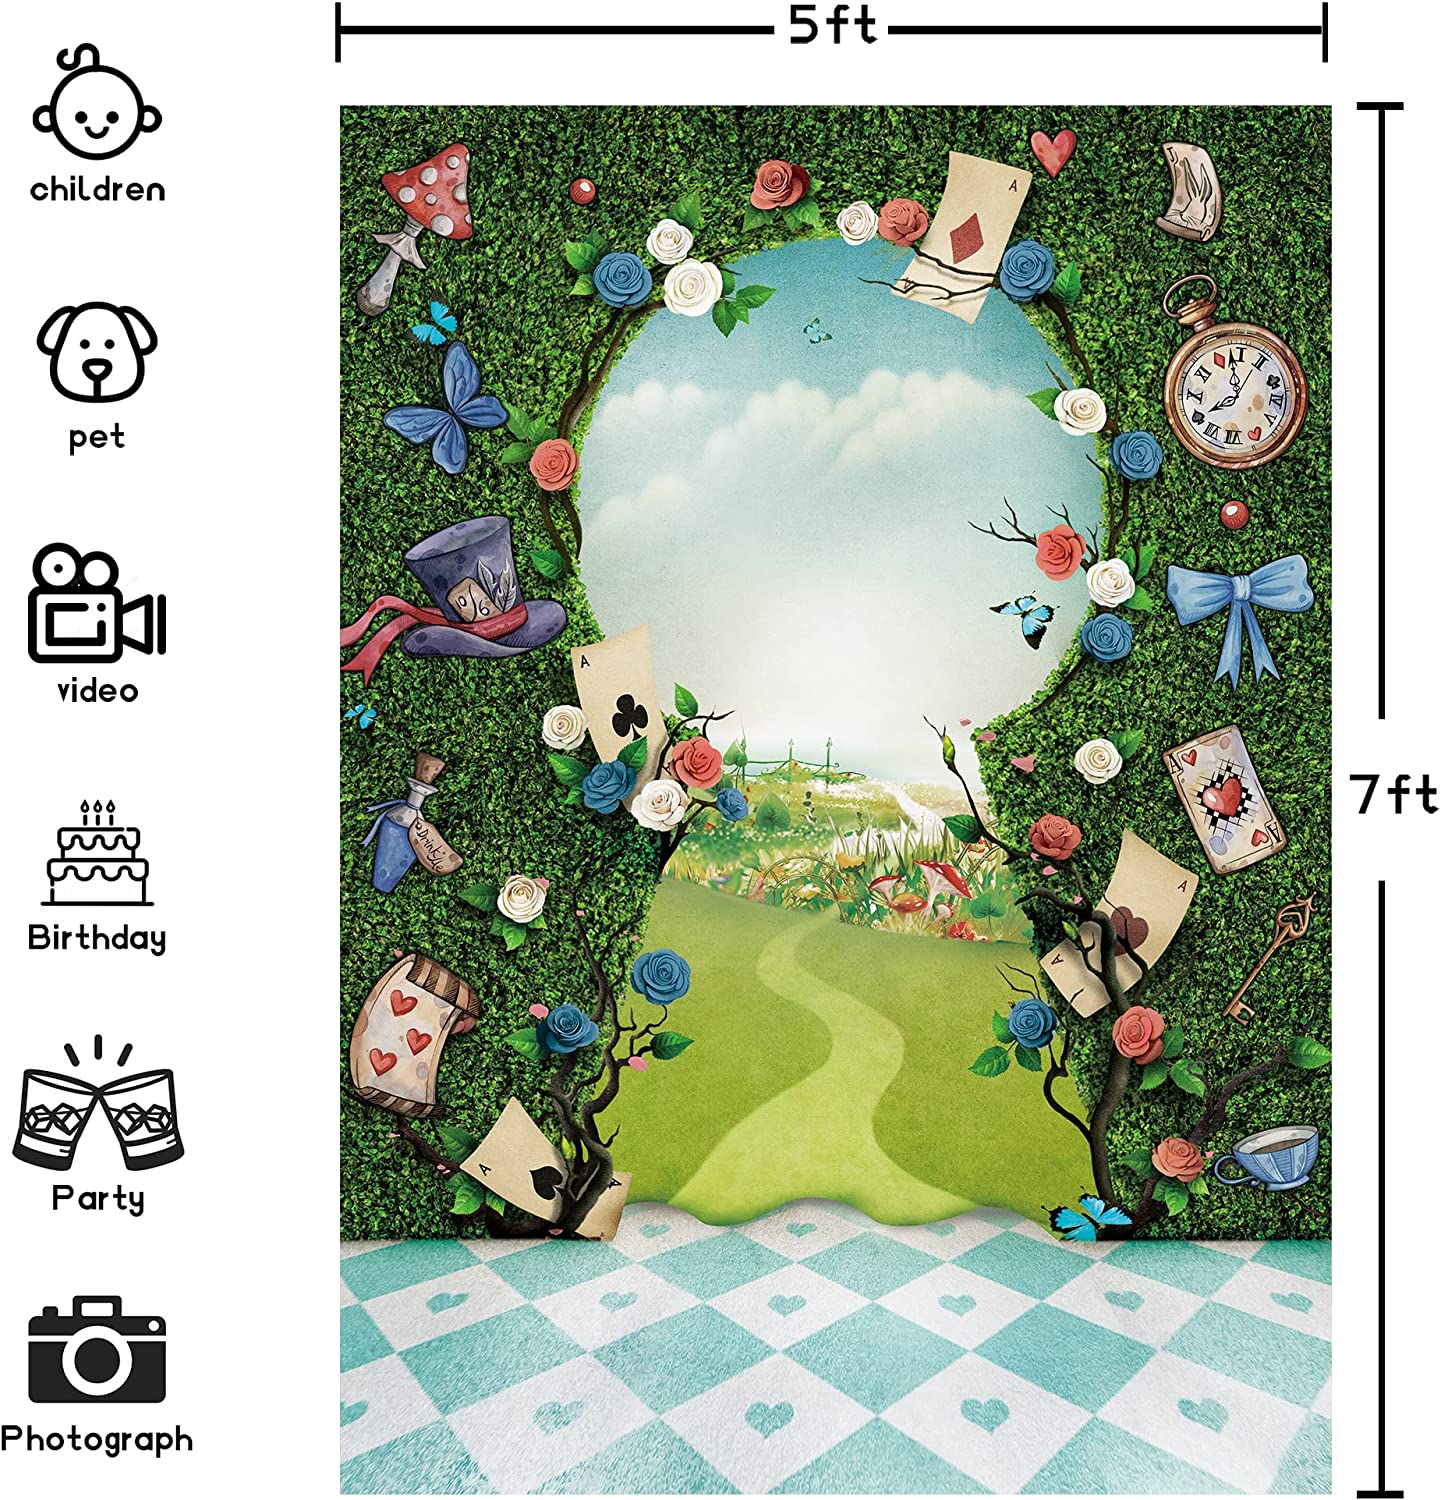 Newsely Wonderland Green Fence Tea Party Photo Backdrop 5Wx7H Photography Key Hold Checkerboard Background for Newborn Baby Shower Boys Kids Party Decorations Banner Photo Booth Props Supplies